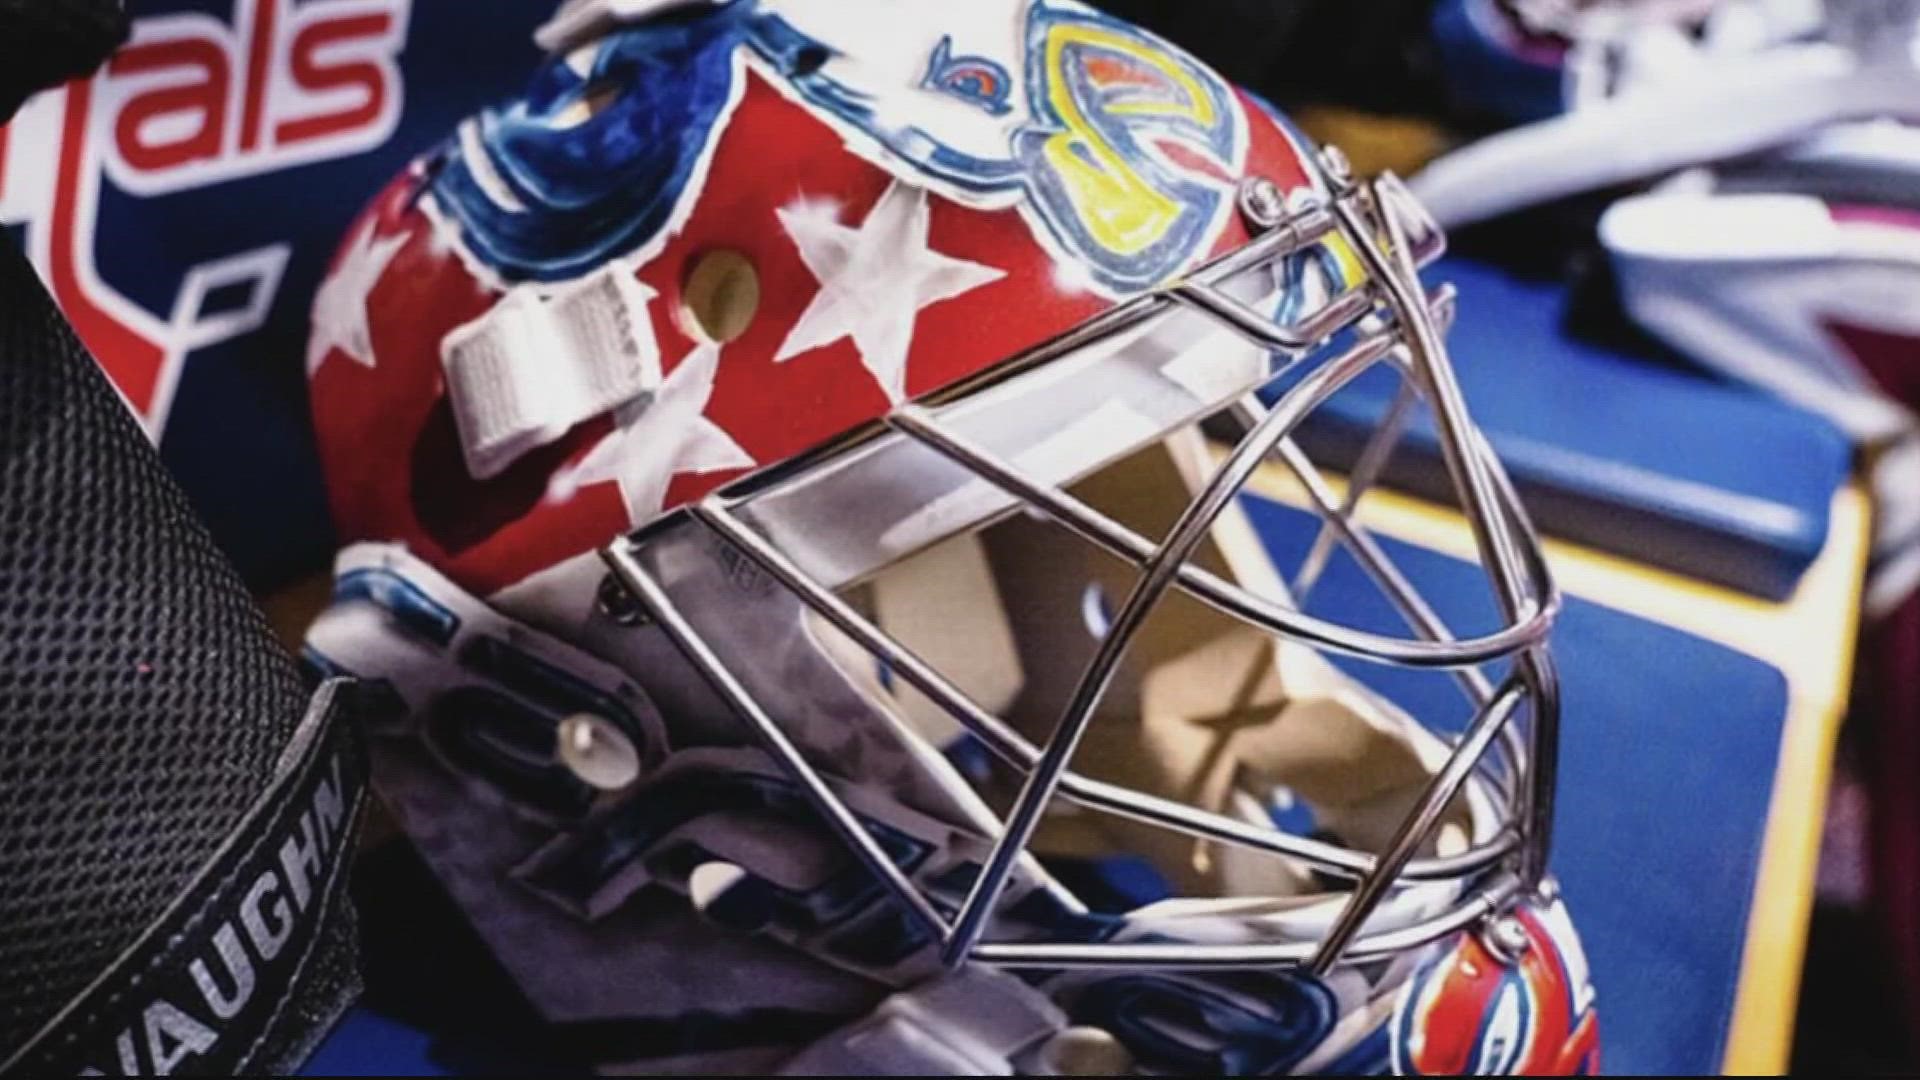 Sharla McBride speaks with the new Capitals goalie, and the meaning and man behind the mask.